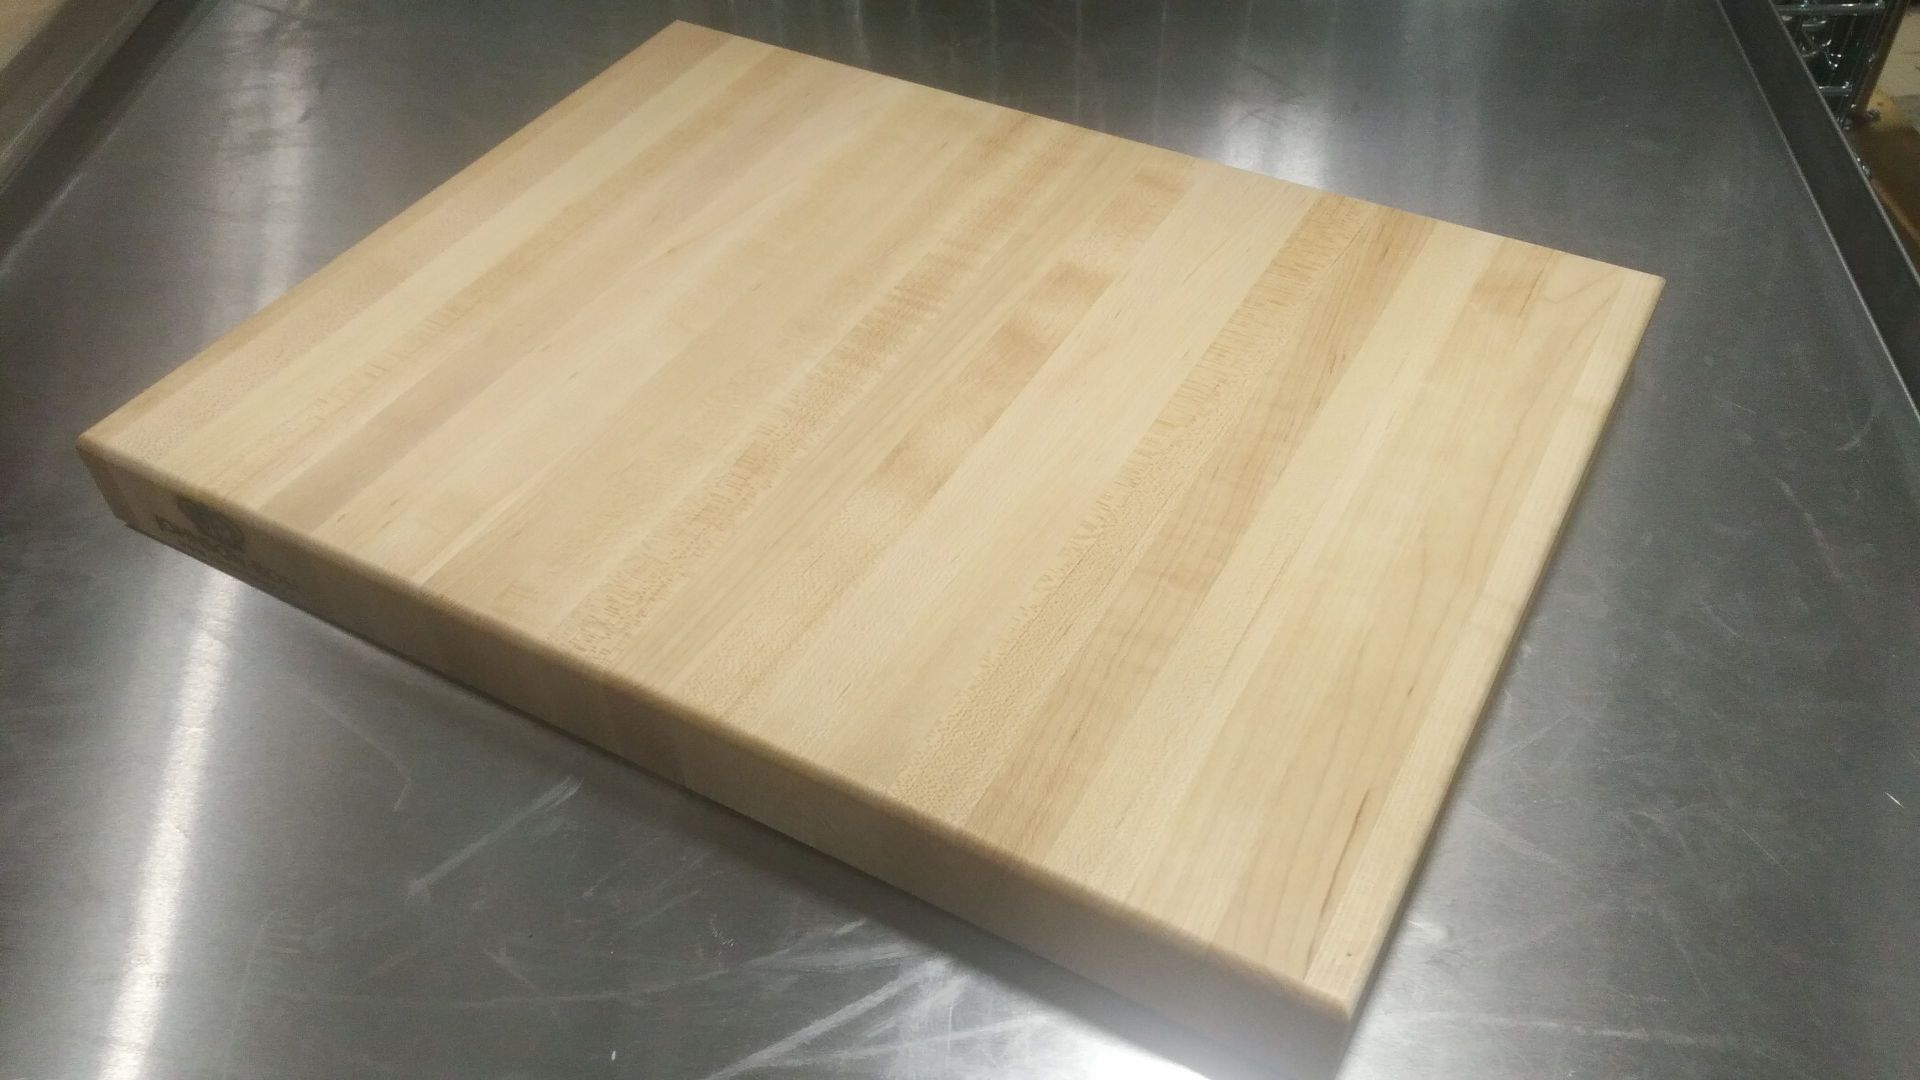 16" x 12" x 1.5" Hard Canadian Maple Solid Carving Board, Johnson Rose 71216 - Image 2 of 3